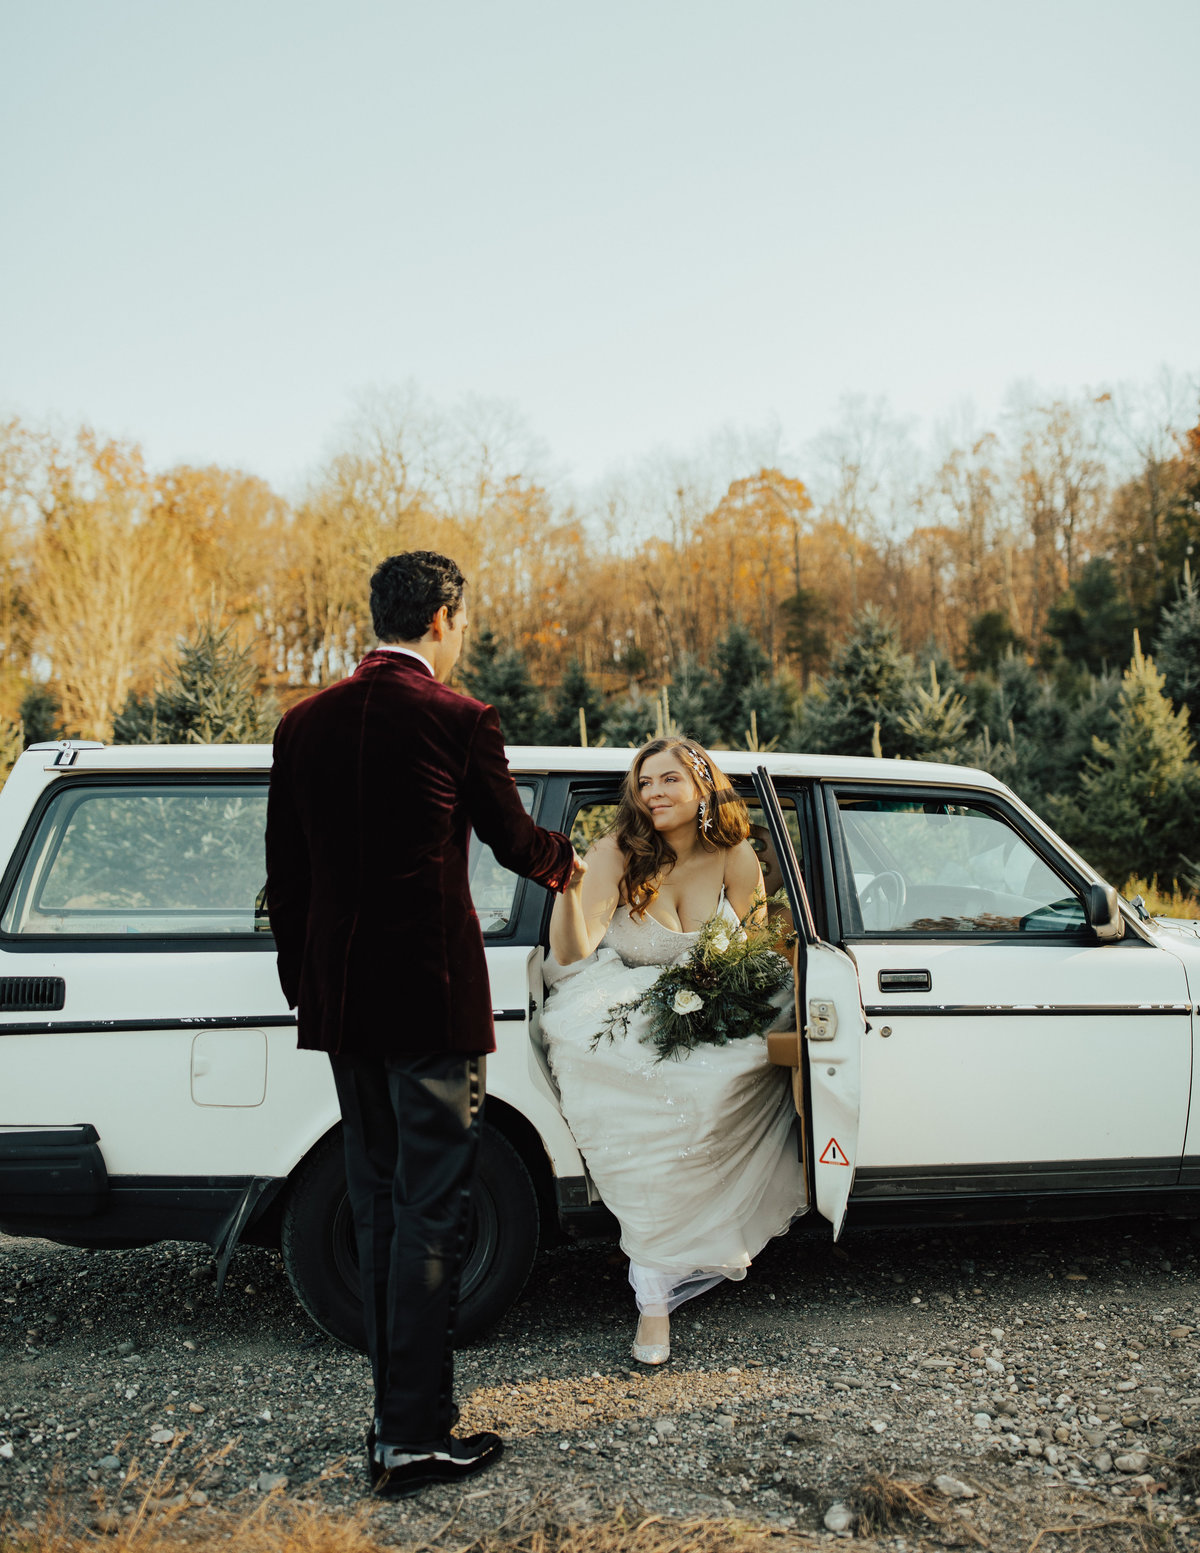 Christy-l-Johnston-Photography-Monica-Relyea-Events-Noelle-Downing-Instagram-Noelle_s-Favorite-Day-Wedding-Battenfelds-Christmas-tree-farm-Red-Hook-New-York-Hudson-Valley-upstate-november-2019-AP1A7782